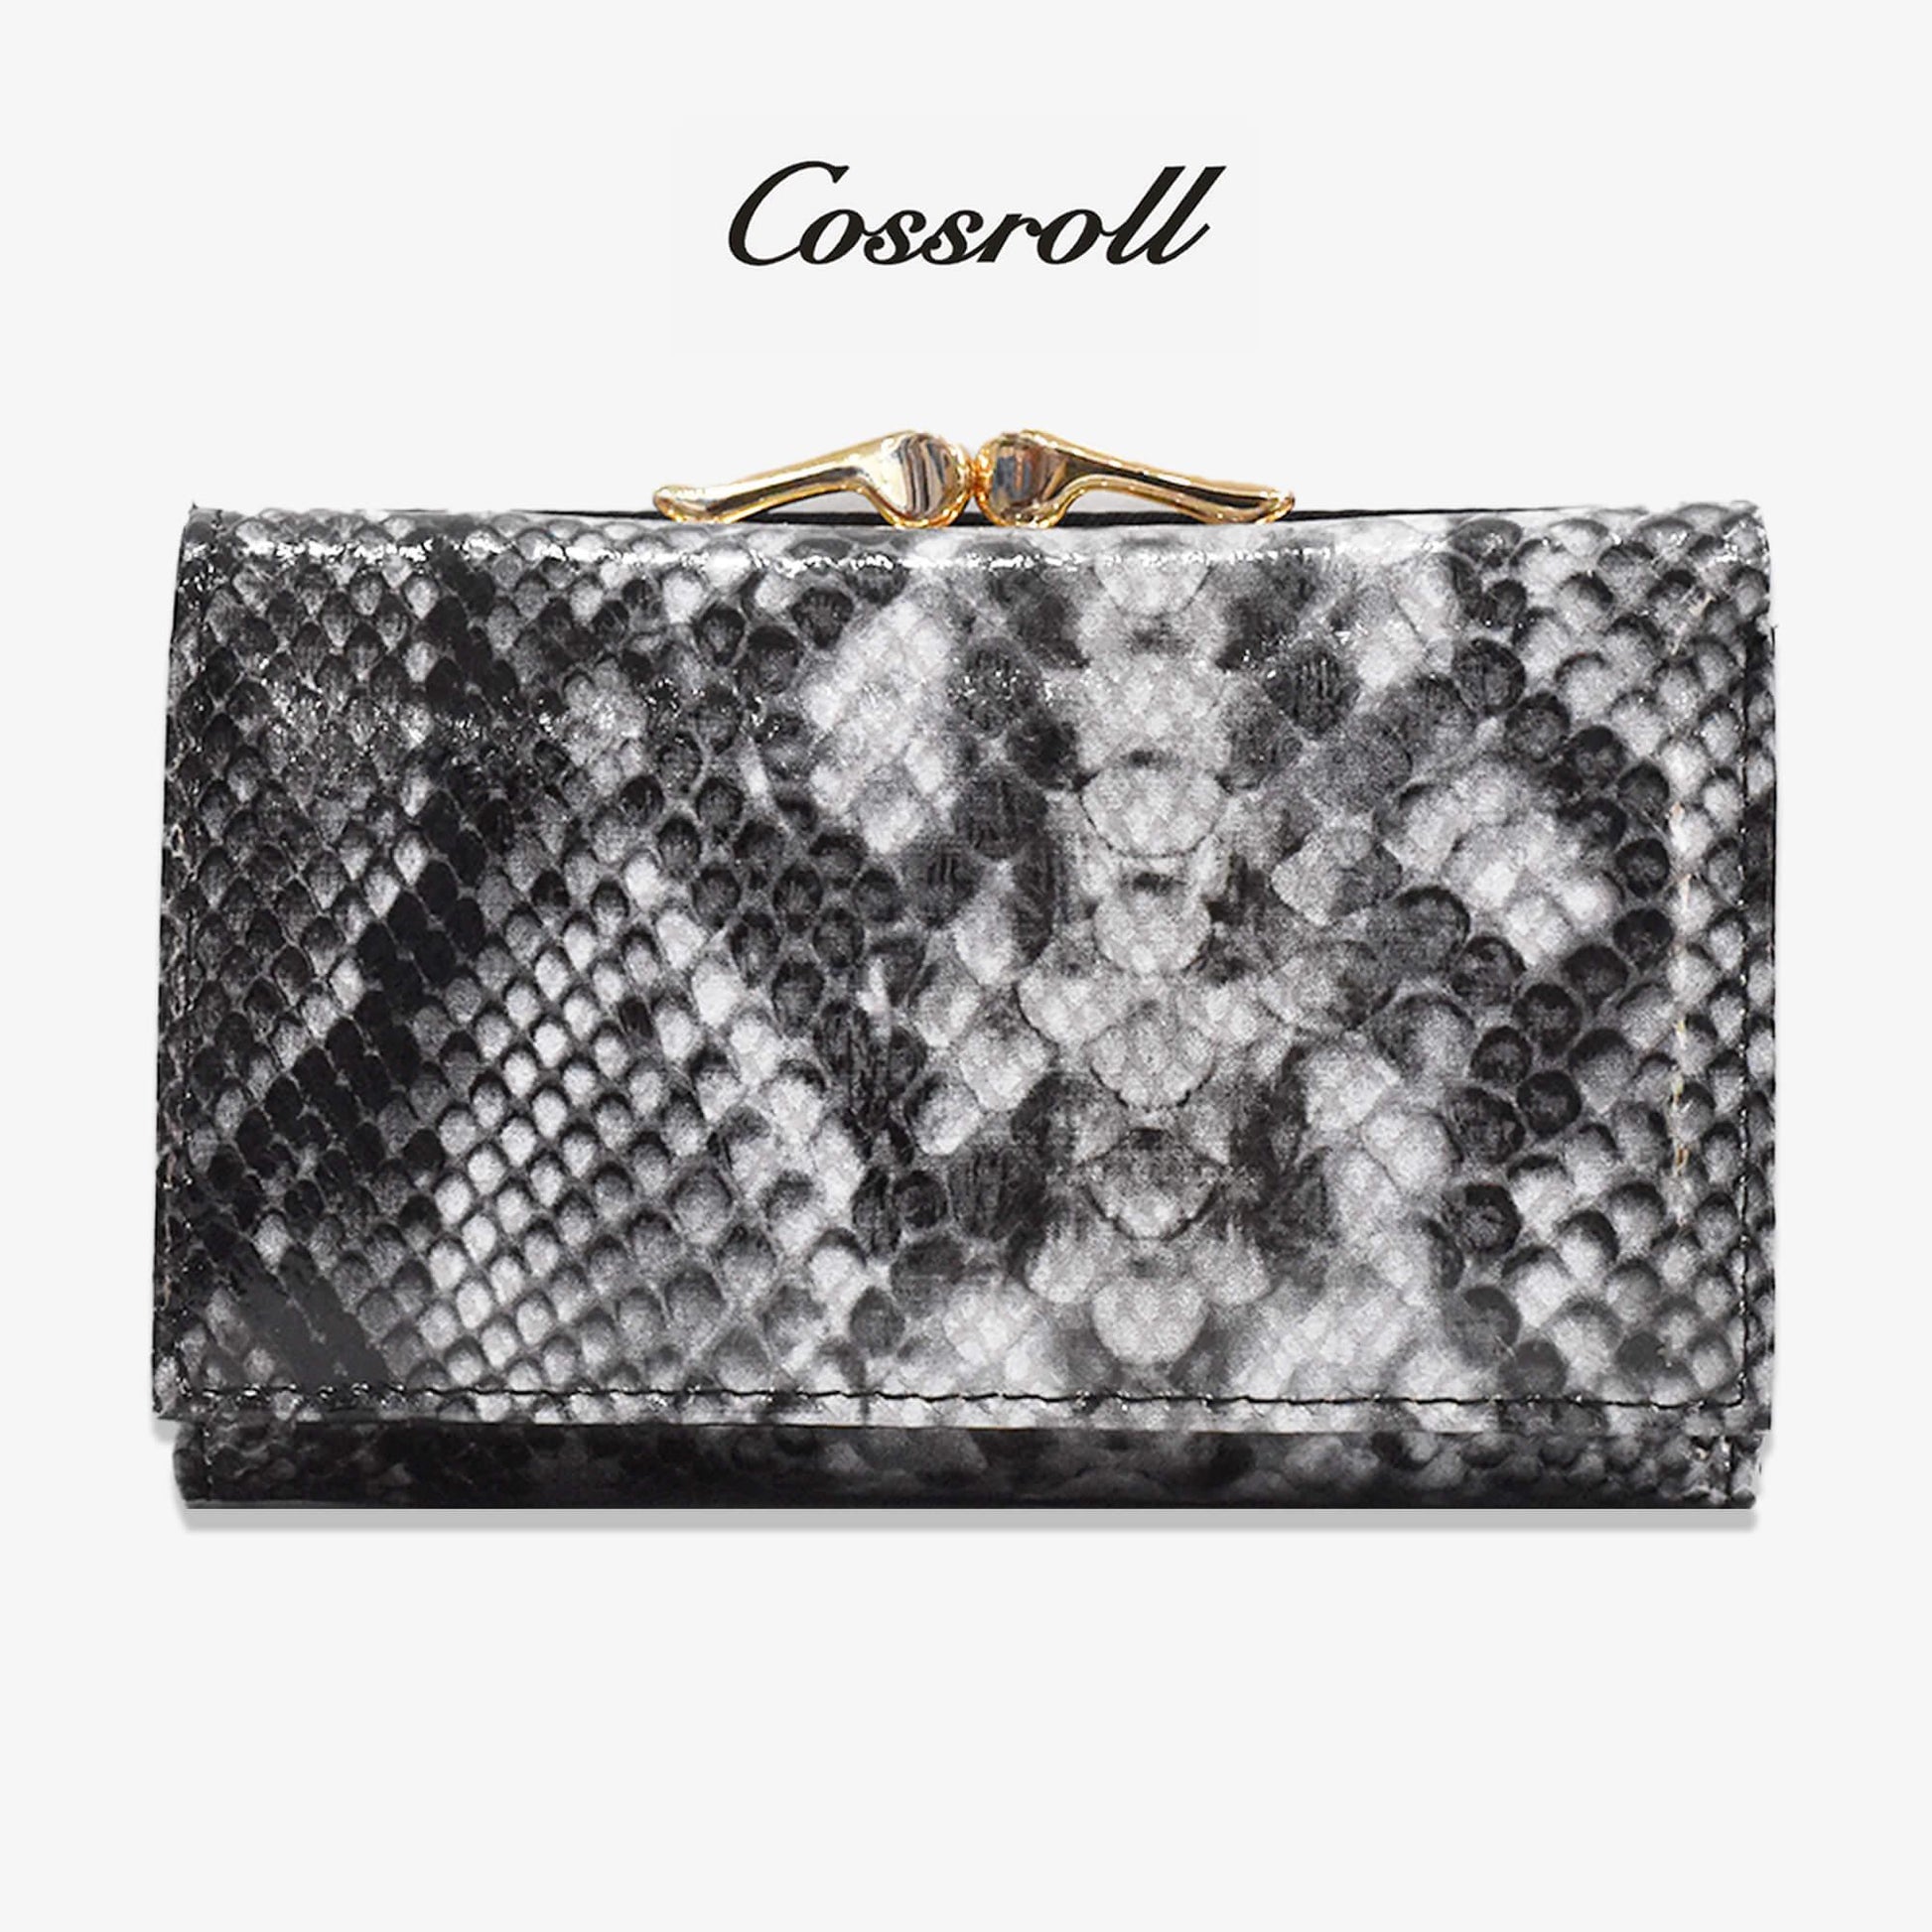 Women Genuine Leather Wallet Manufacturer Python Snake Prints- cossroll.leather